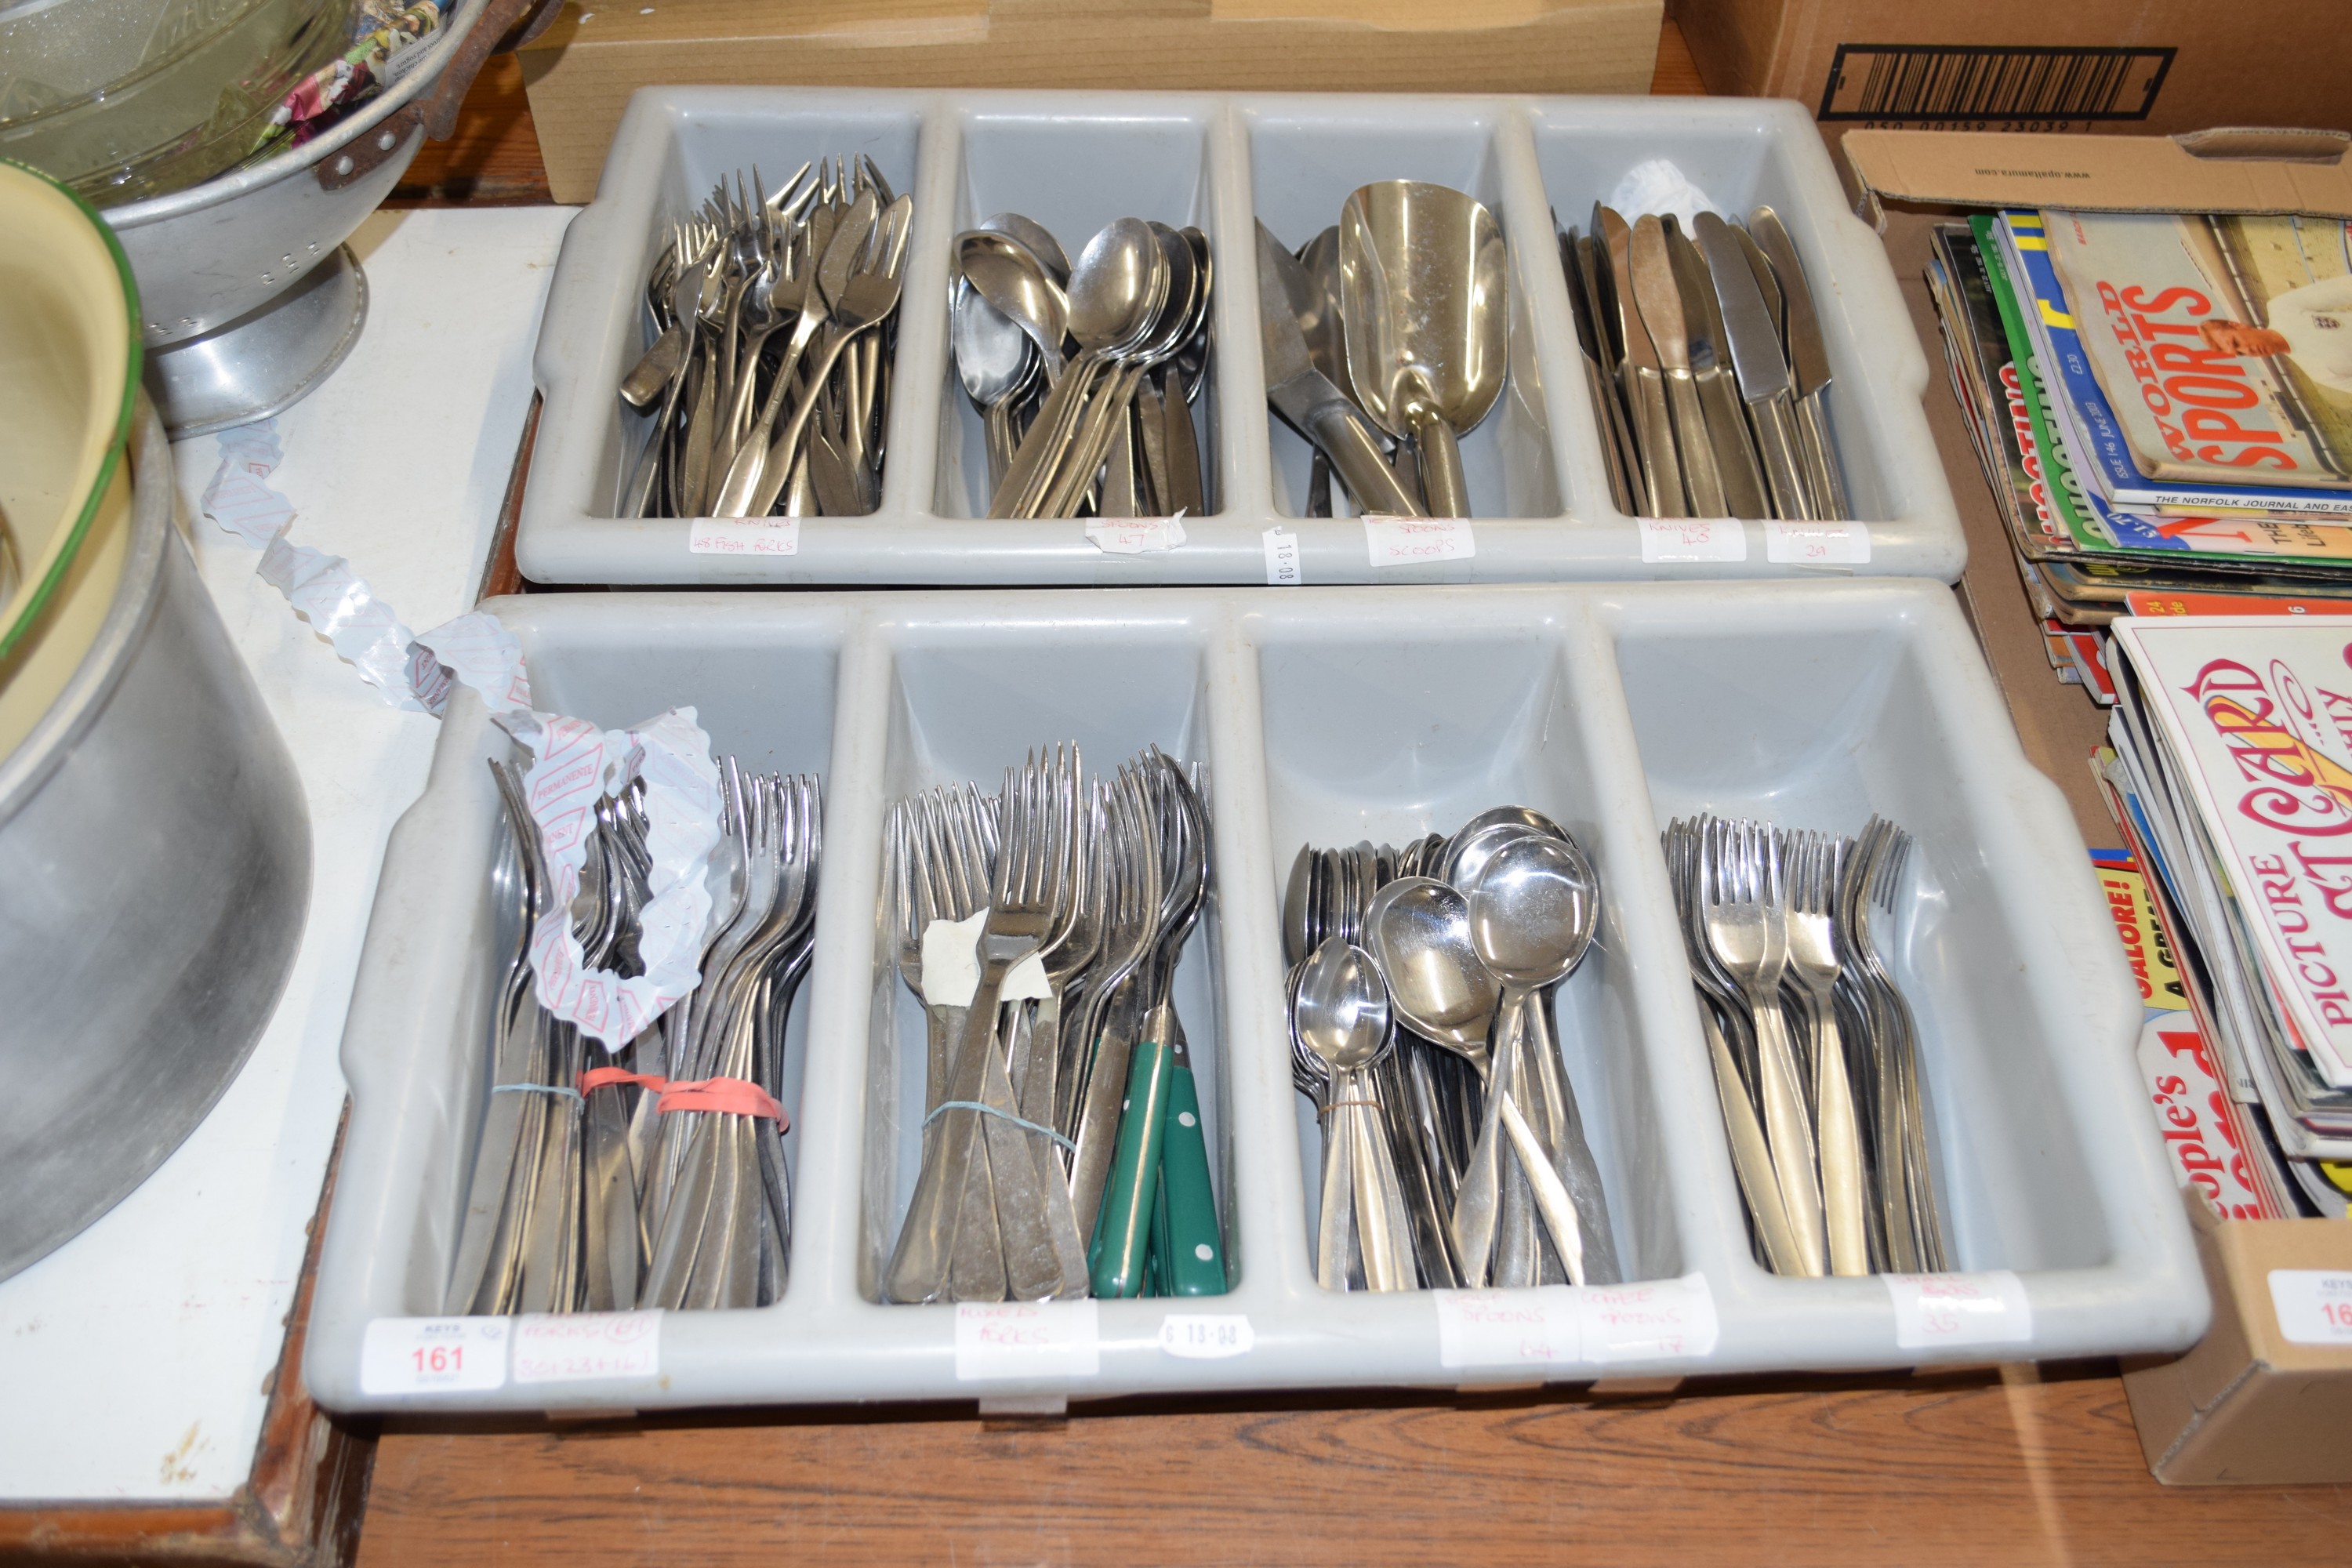 TWO CUTLERY TRAYS CONTAINING STAINLESS STEEL CUTLERY